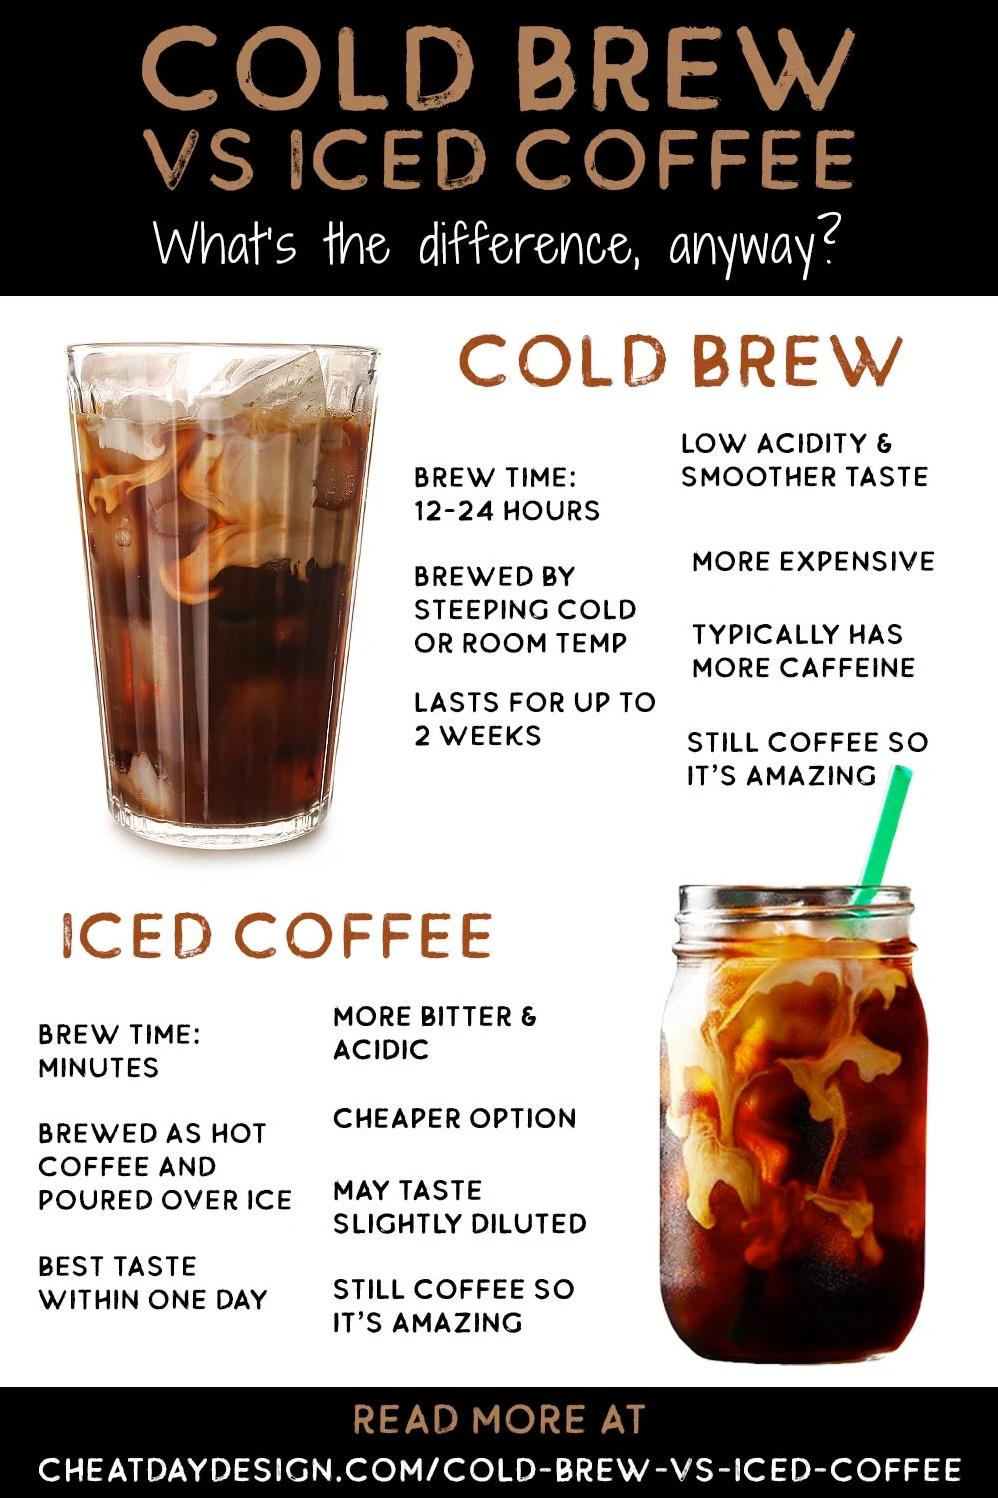  Perfect for a summer morning, add ice and milk or cream for an iced coffee experience like no other.